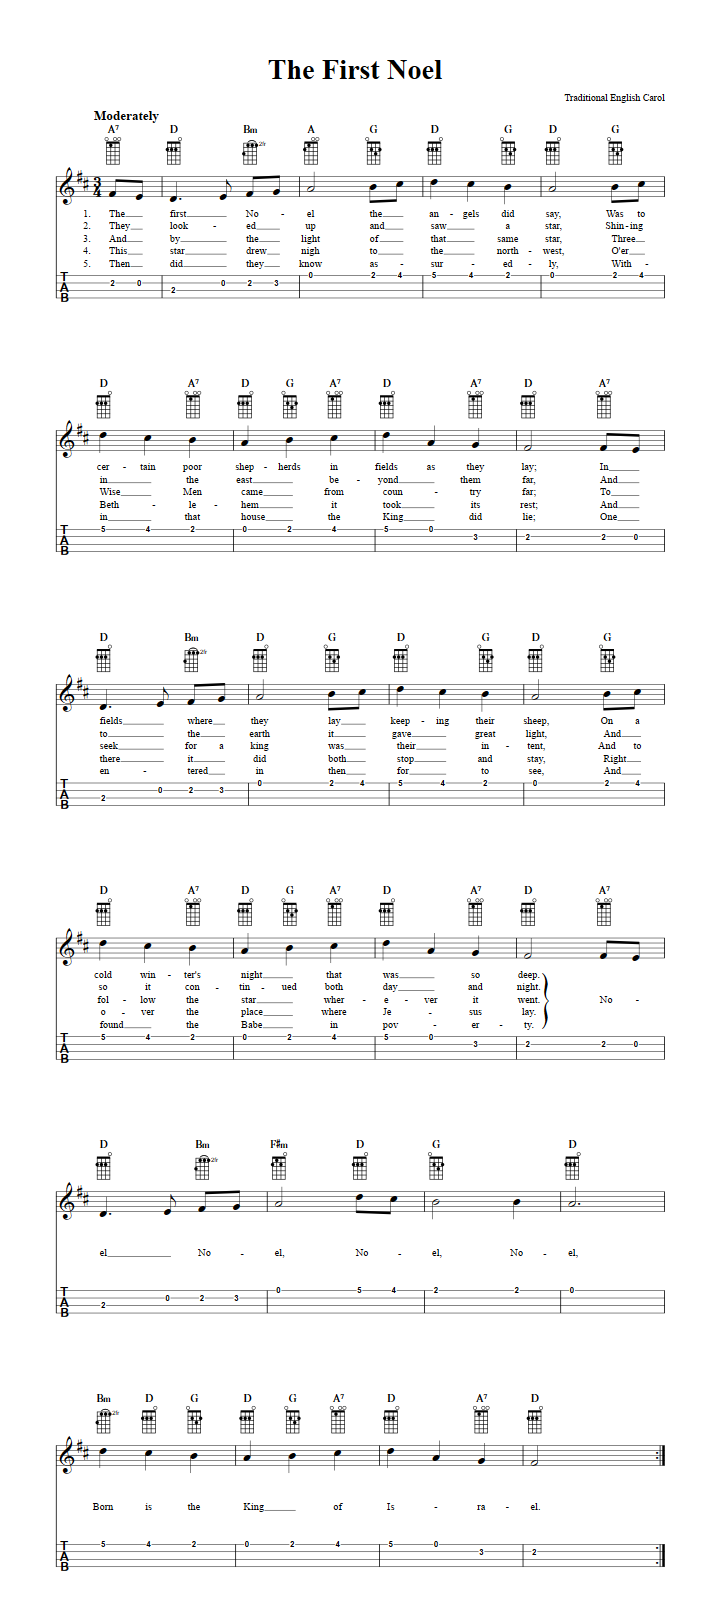 The First Noel: Chords, Sheet Music and Tab for Ukulele with Lyrics